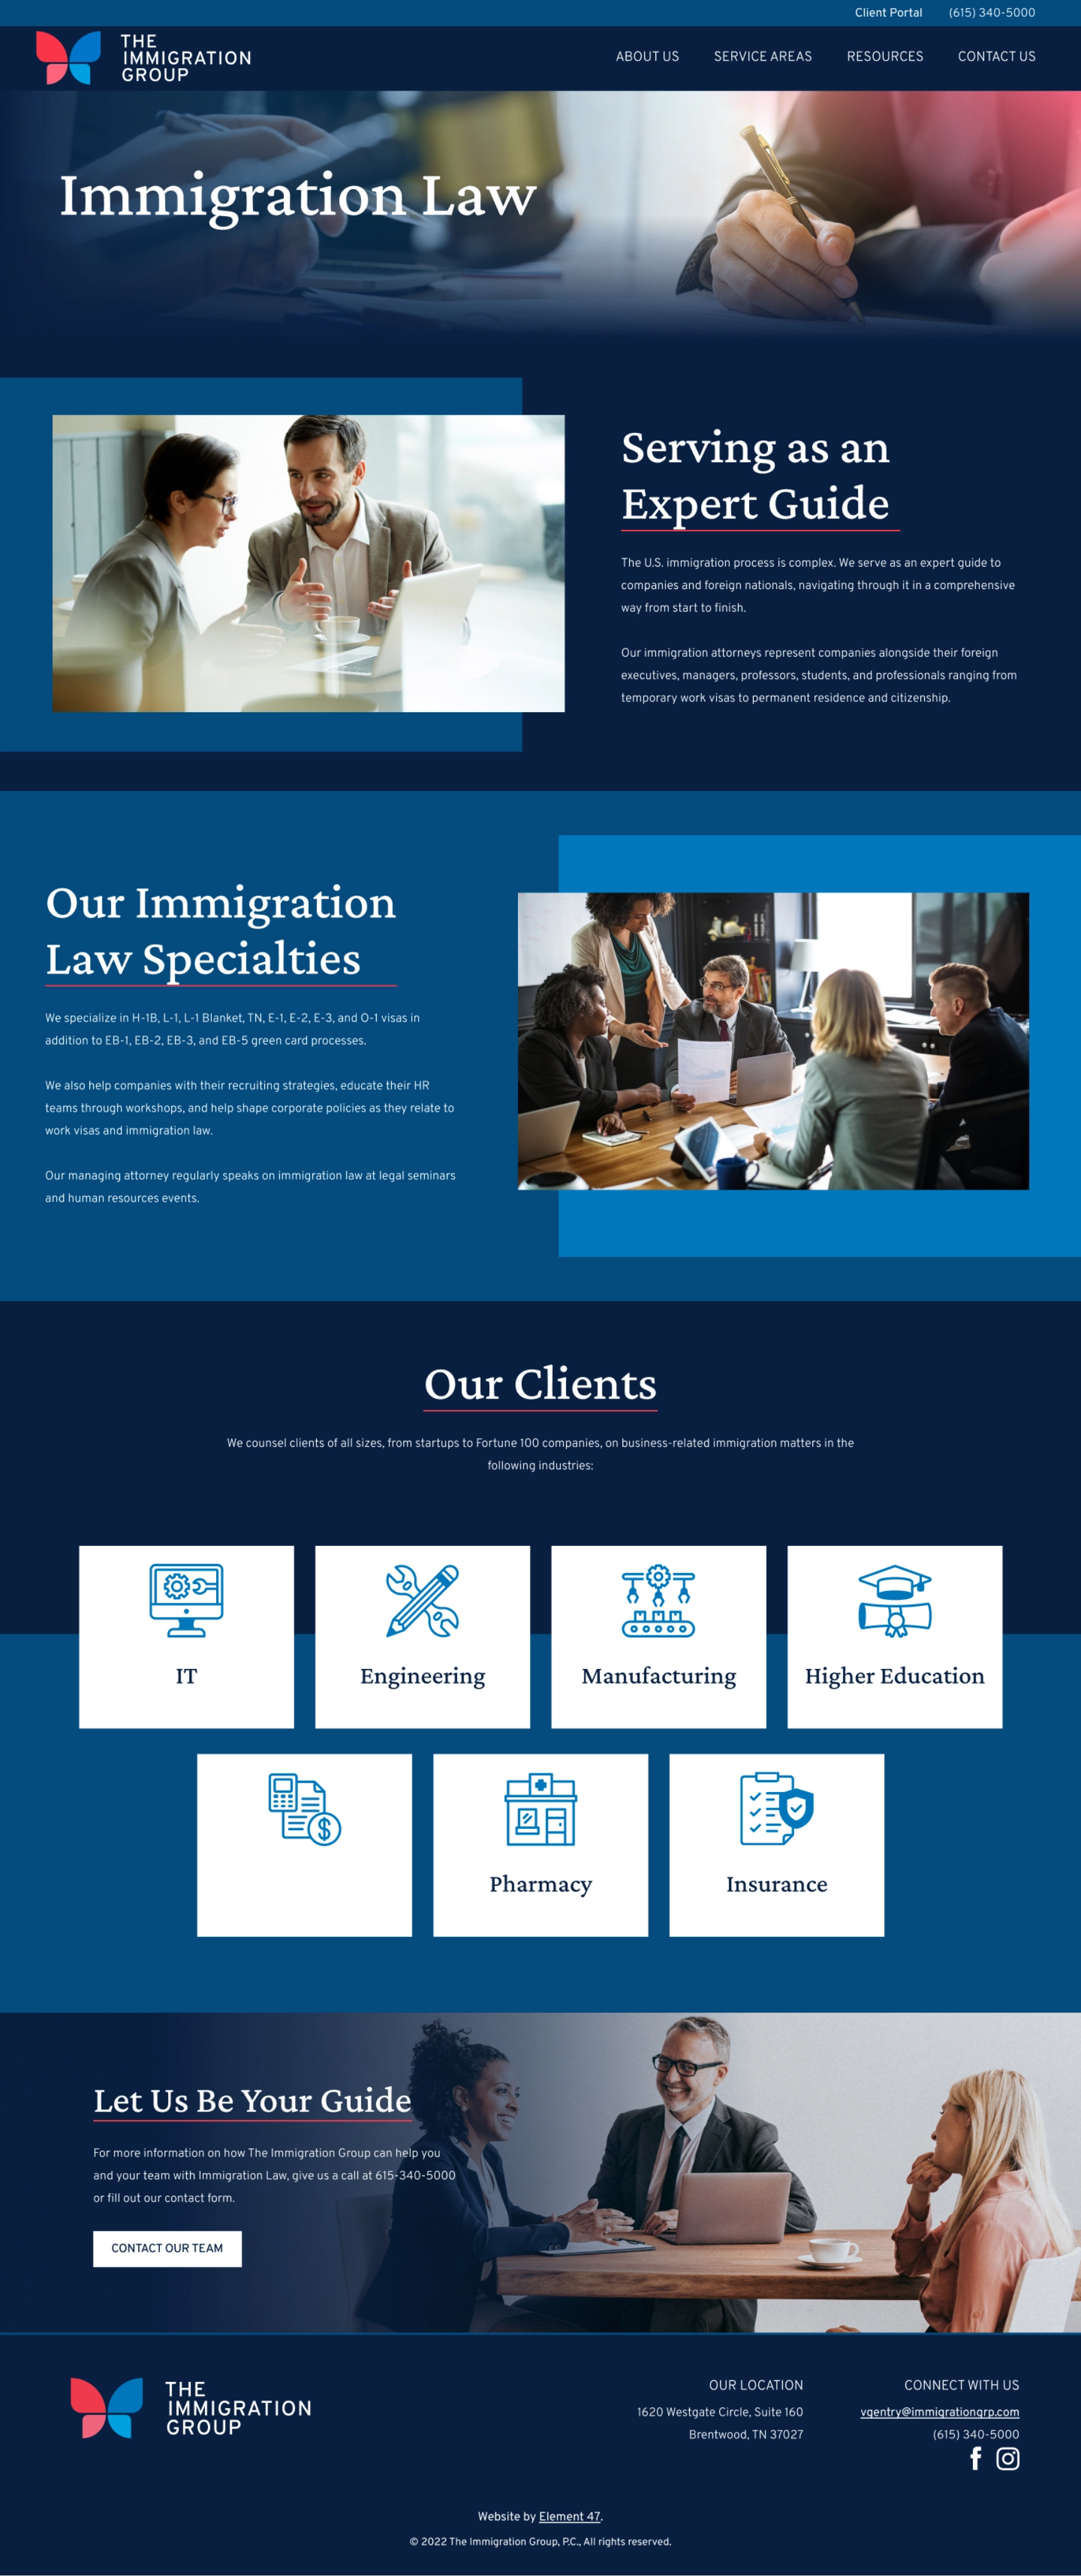 The Immigration Group immigration law page design